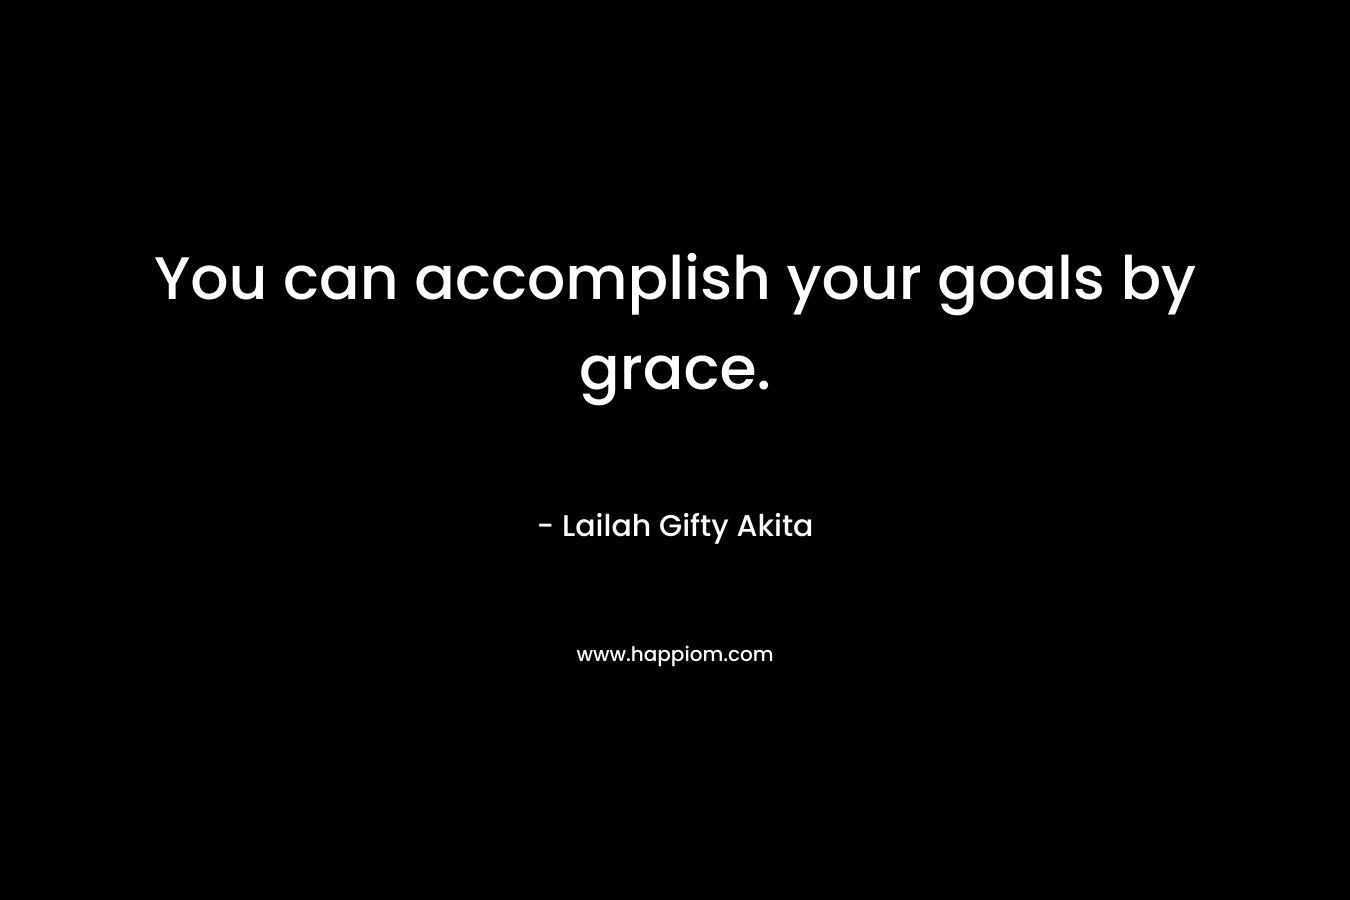 You can accomplish your goals by grace.